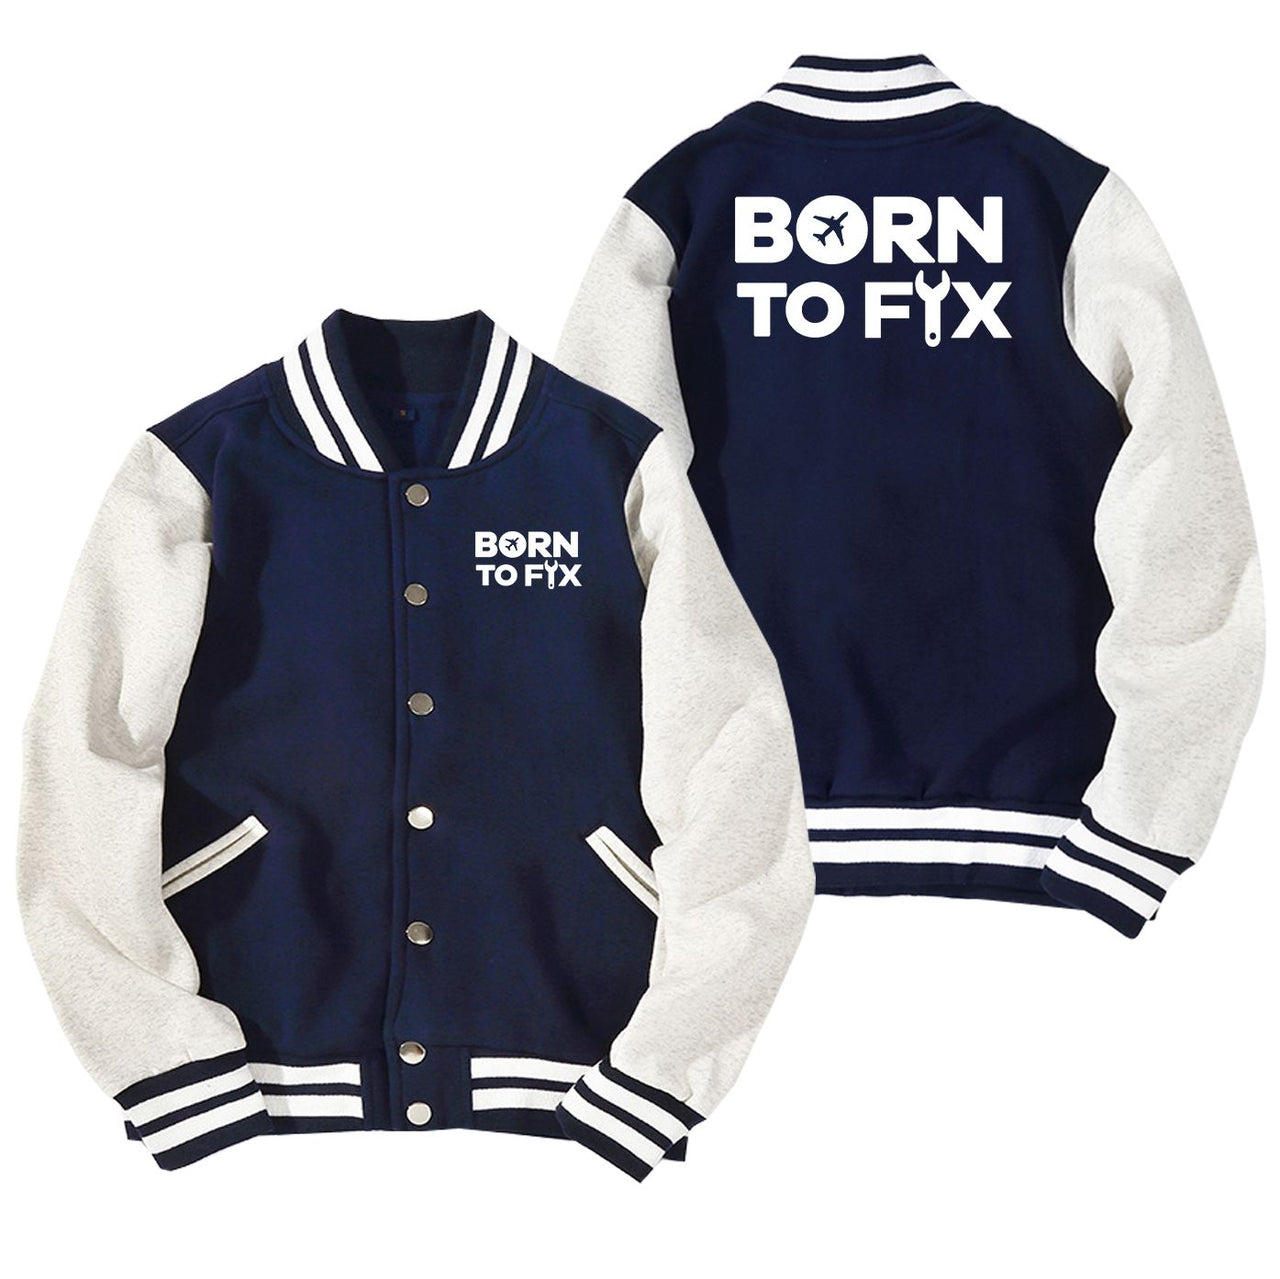 Born To Fix Airplanes Designed Baseball Style Jackets